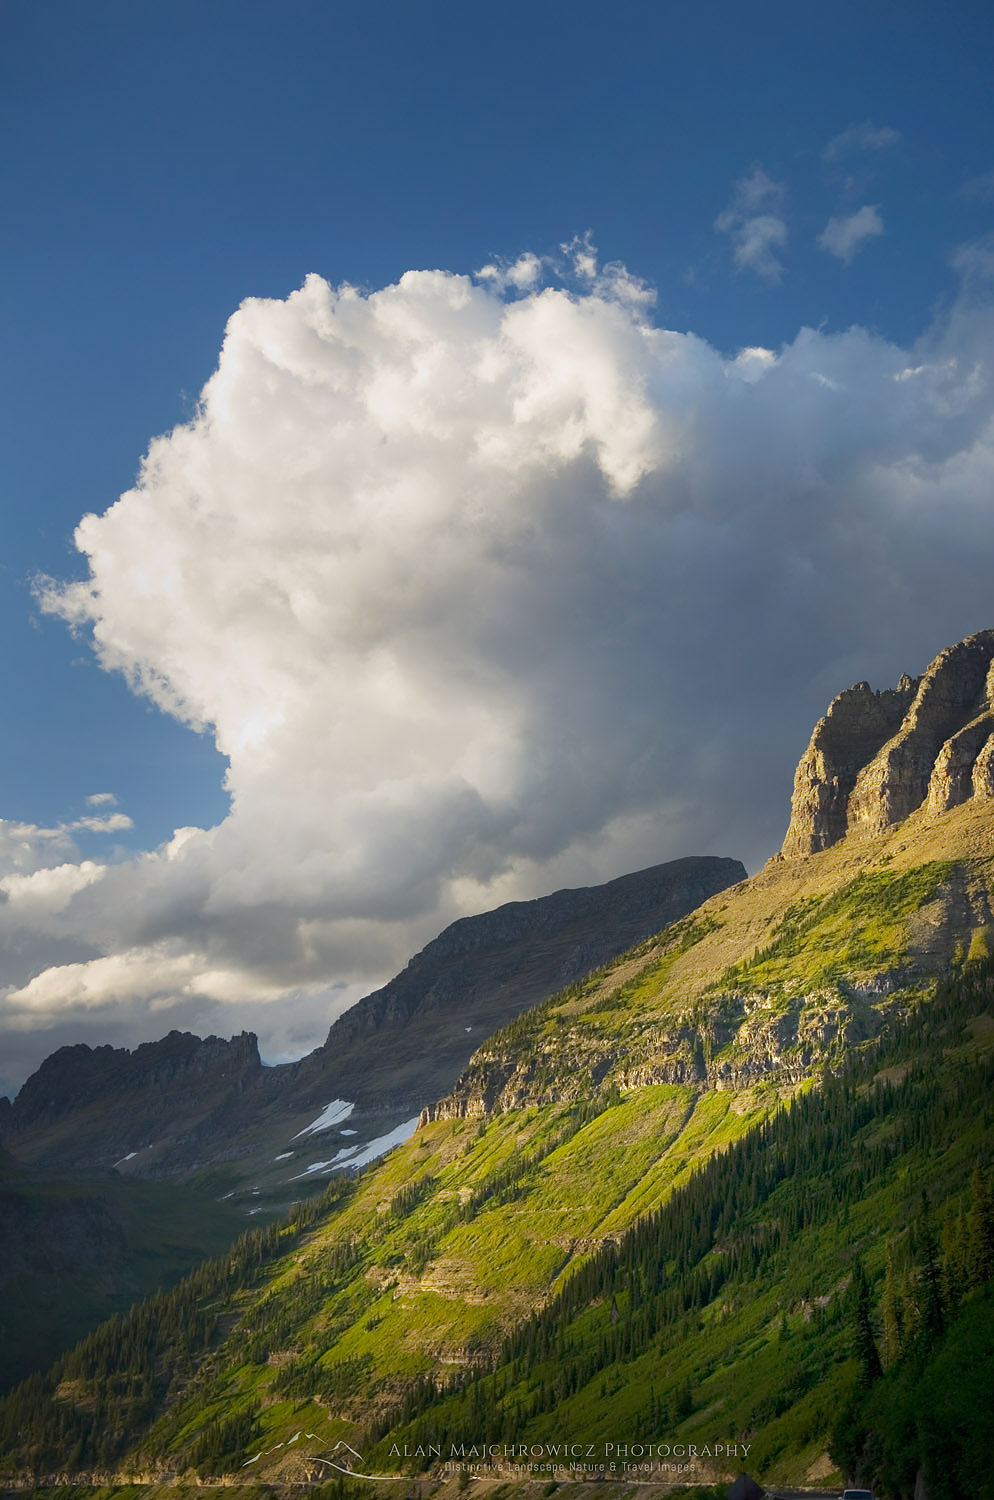 Clouds and the Garden Wall bathed in evening light, Glacier National Park Montana #46513